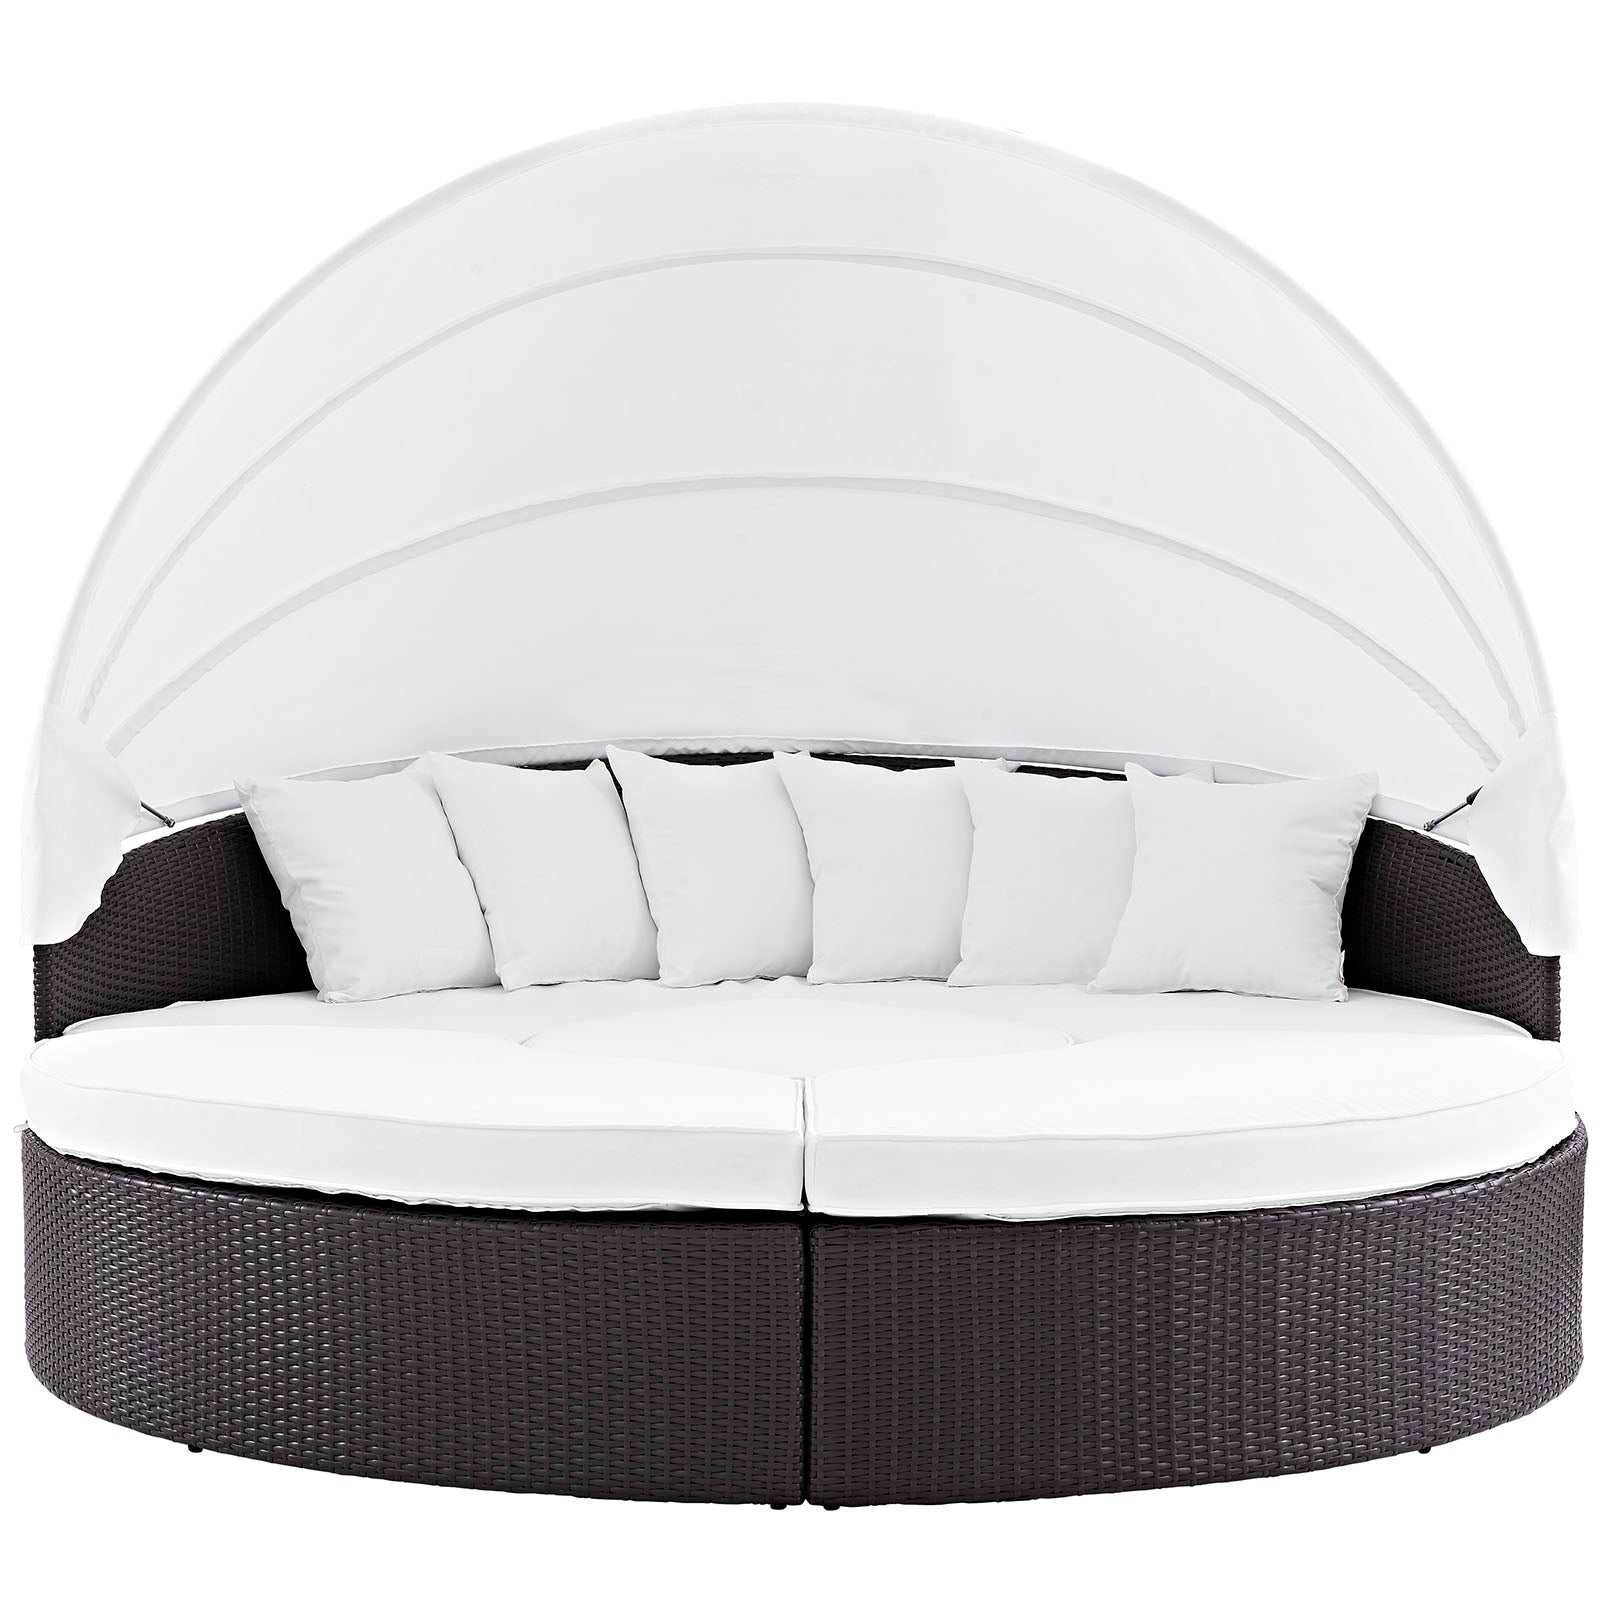 Modway Patio Daybeds - Convene Canopy Outdoor Patio 86.5"W Daybed Espresso White